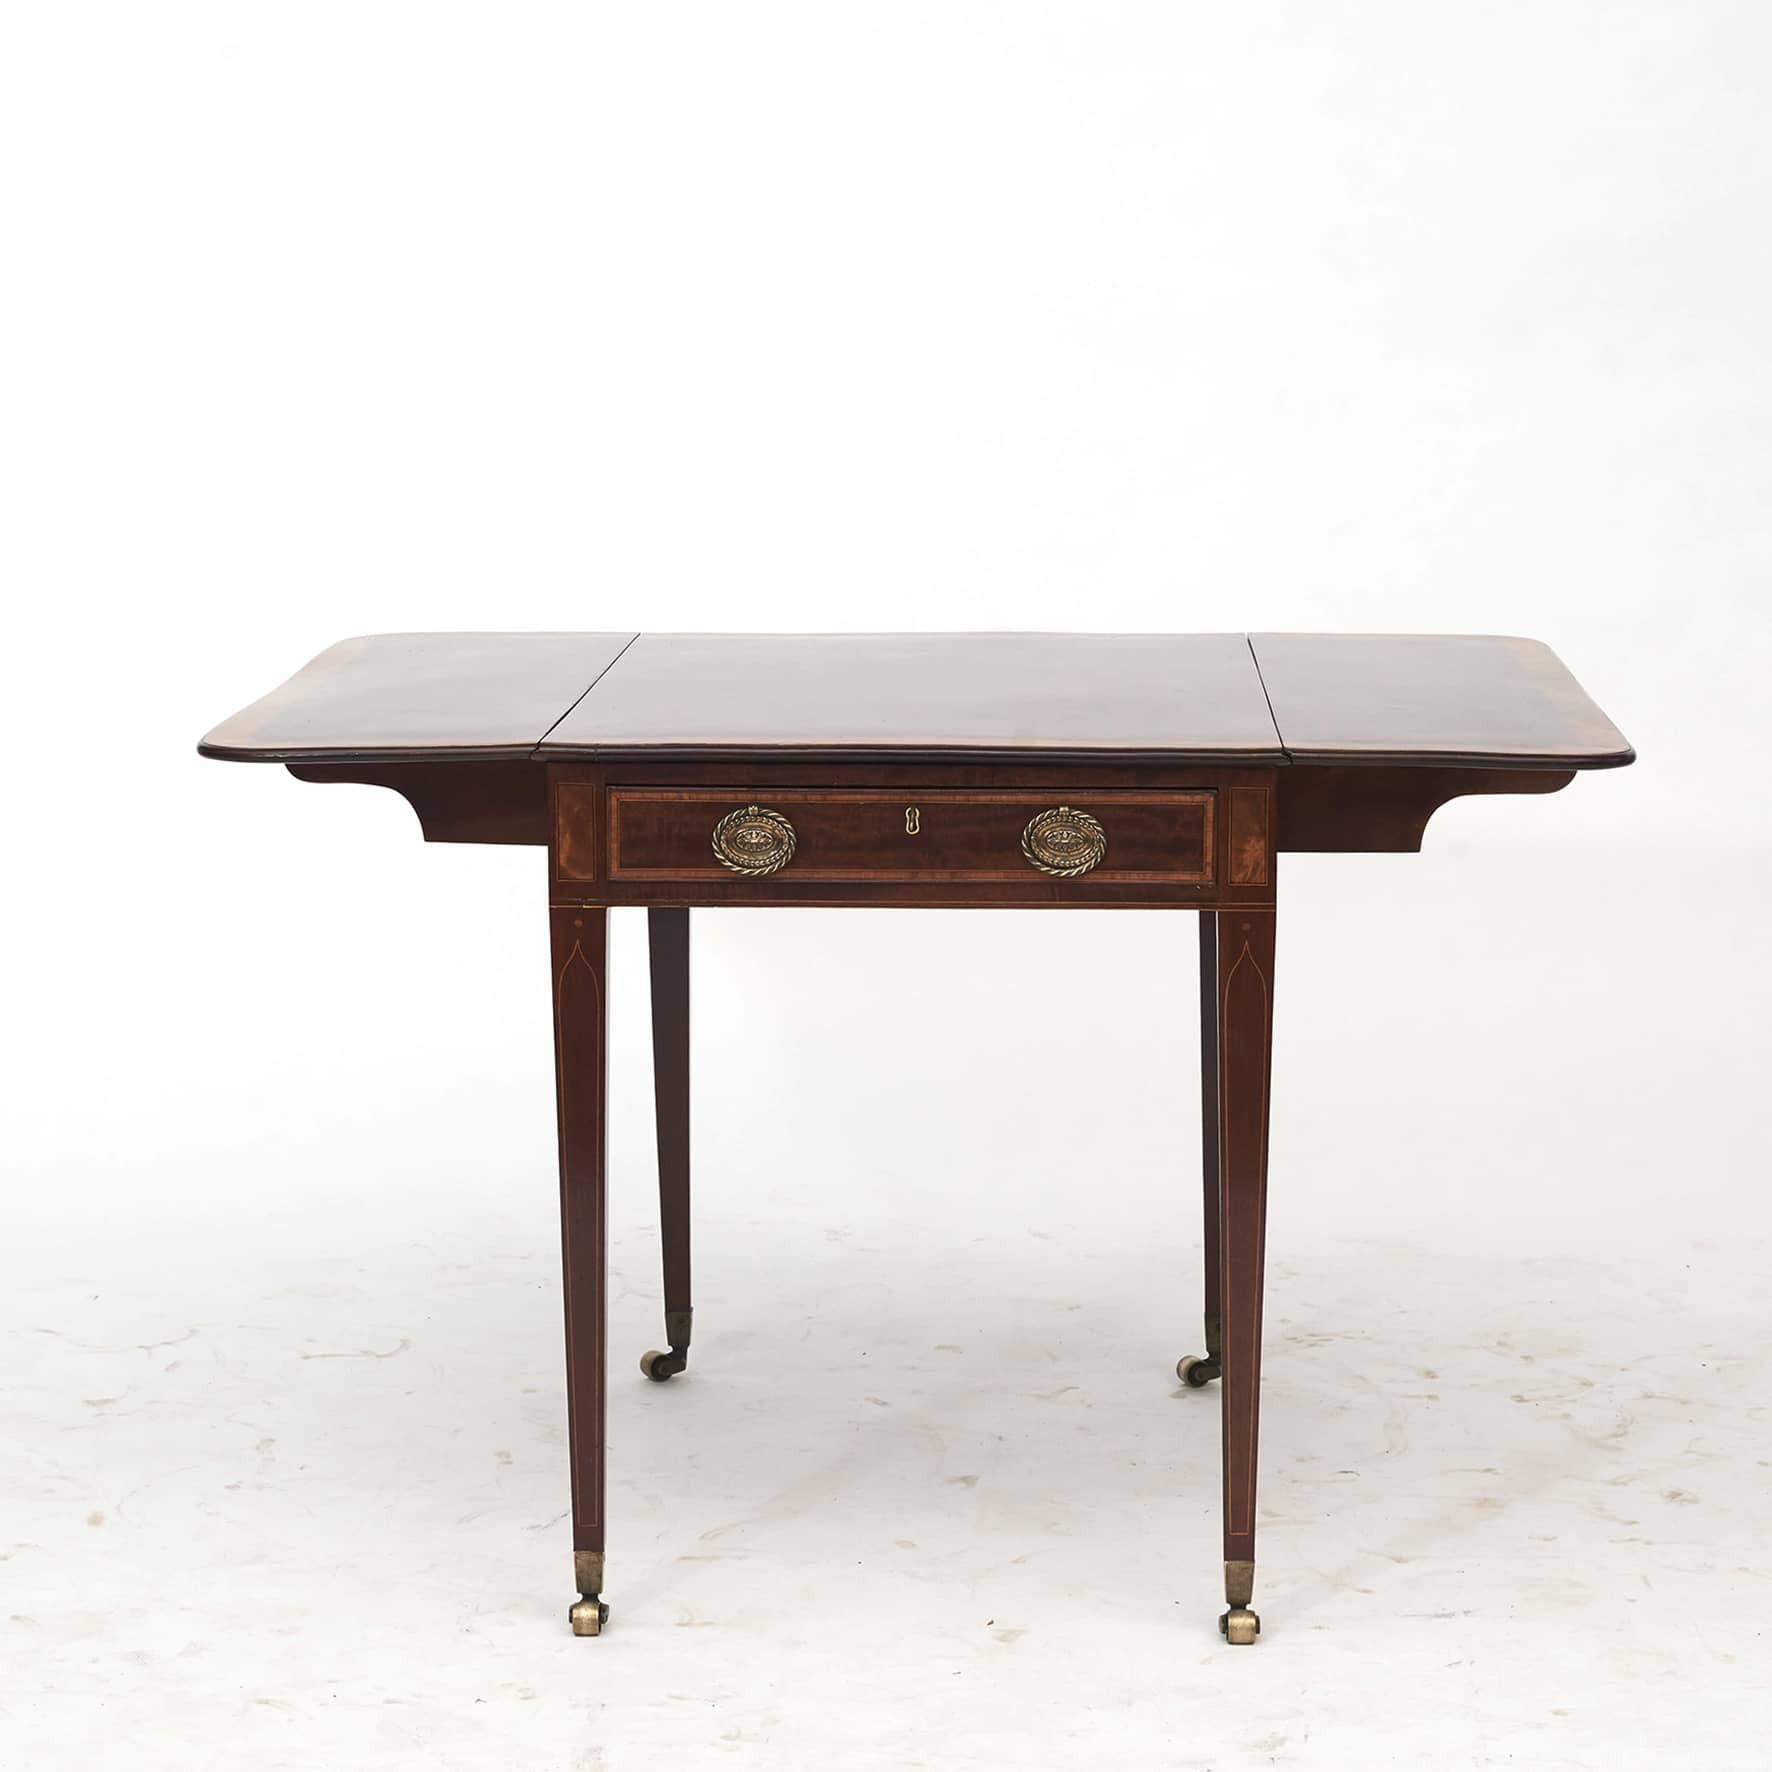 Georgian Pembroke table with a drawer.
Made of mahogany with inlaid satin wood in the form of a wide edge on the table top and drawer.
Furthermore, line marquetry in satin wood and ebony on table top, drawer and legs.
Original bronze fittings and